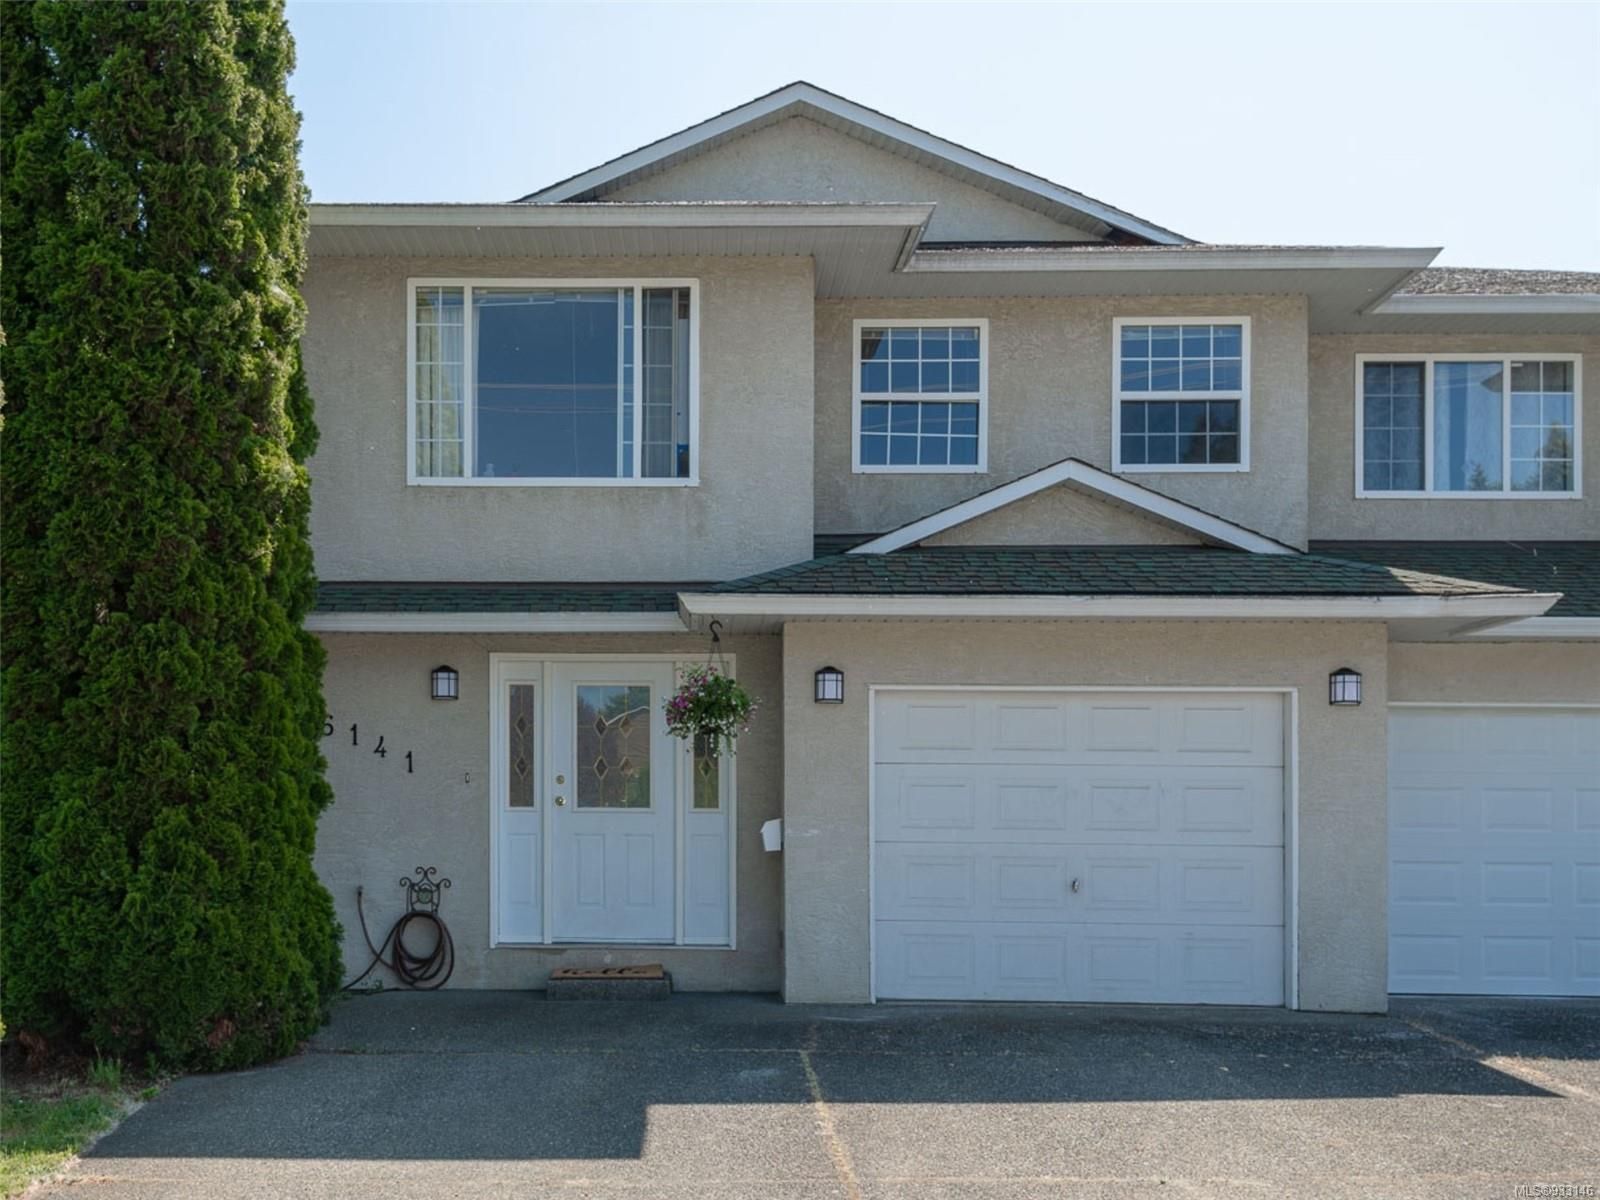 3 bedroom home with a 2 bedroom in-law suite! OR a large 5 bedroom family home!